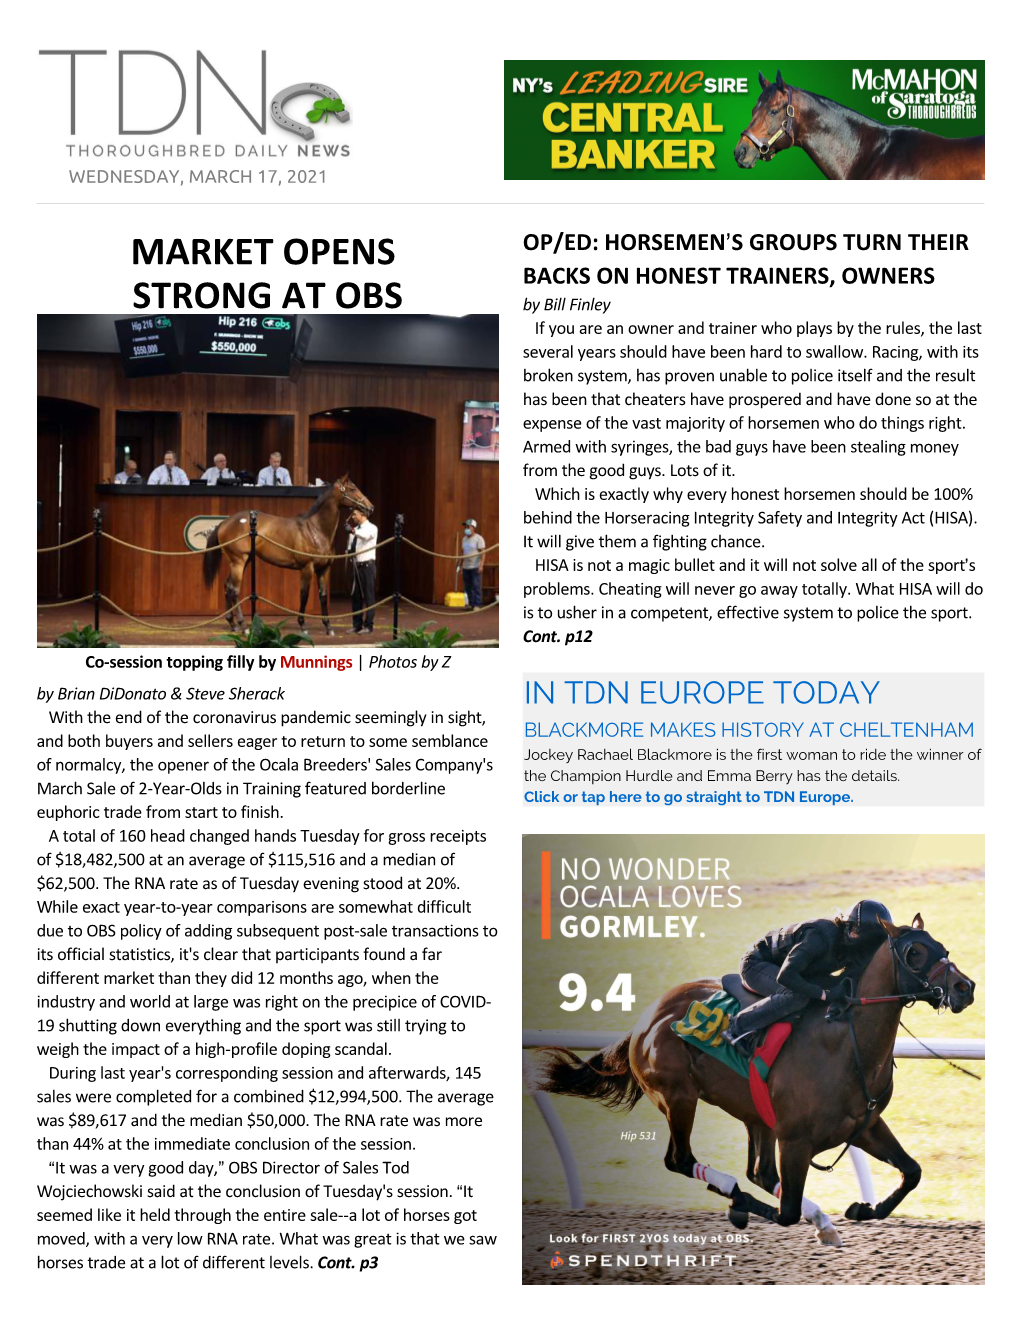 Market Opens Strong at OBS (Cont